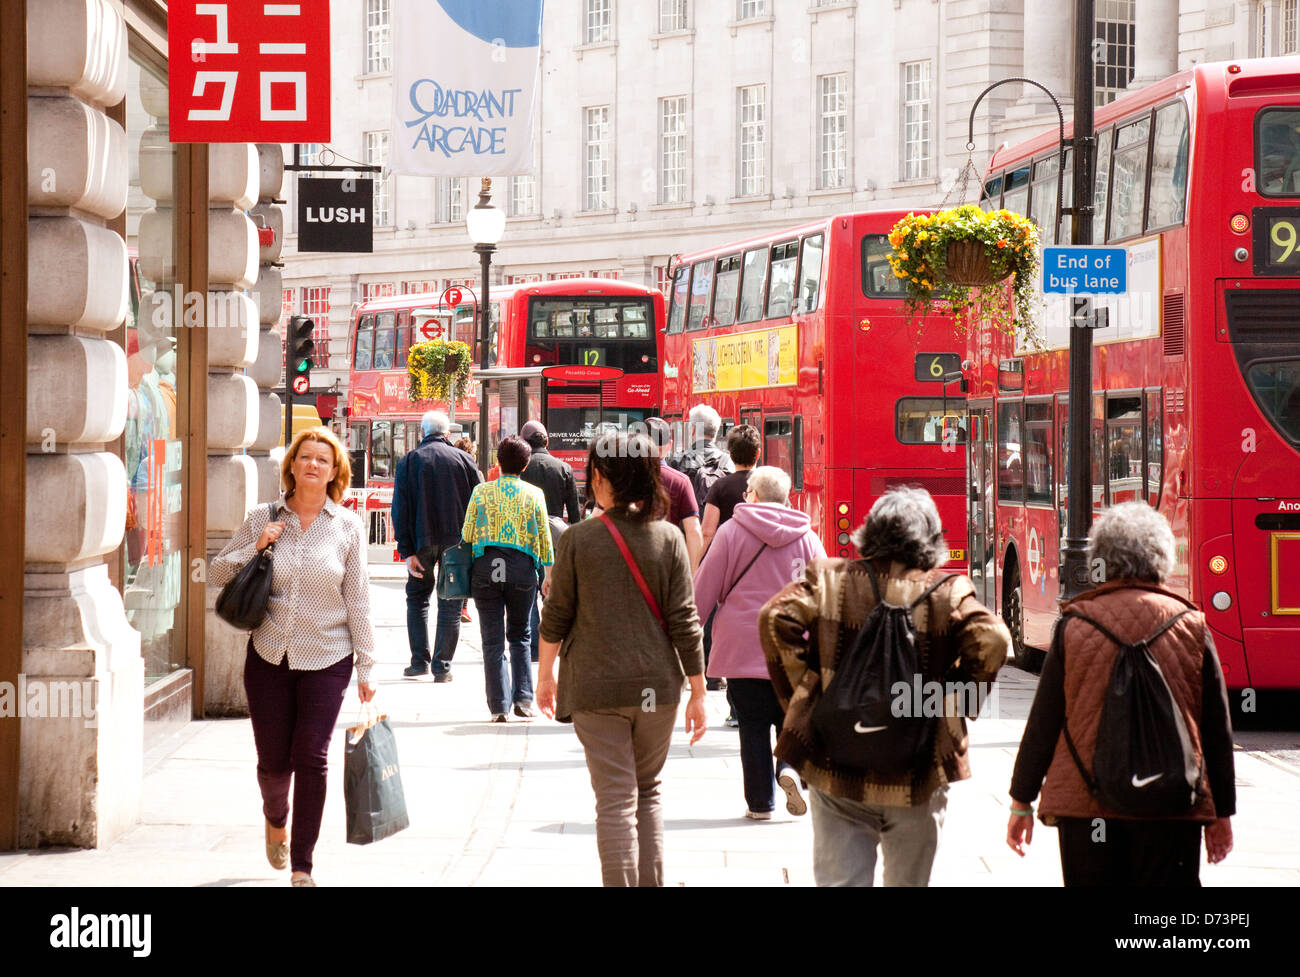 Regent Street street scene with people shopping and london buses, central London W1, England UK Stock Photo